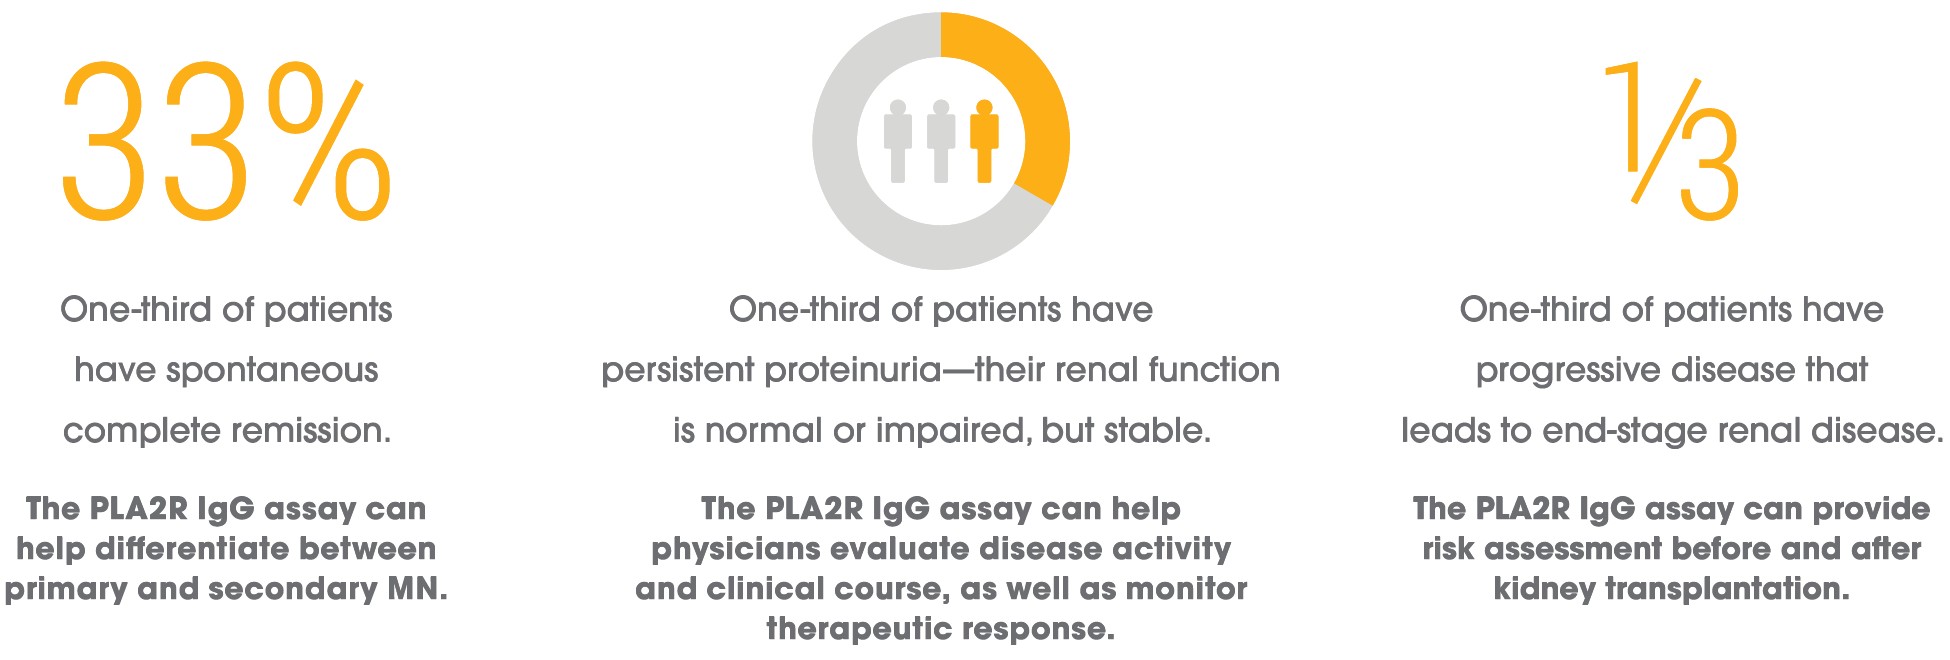 Benefits of the PLA2R IgG Assay